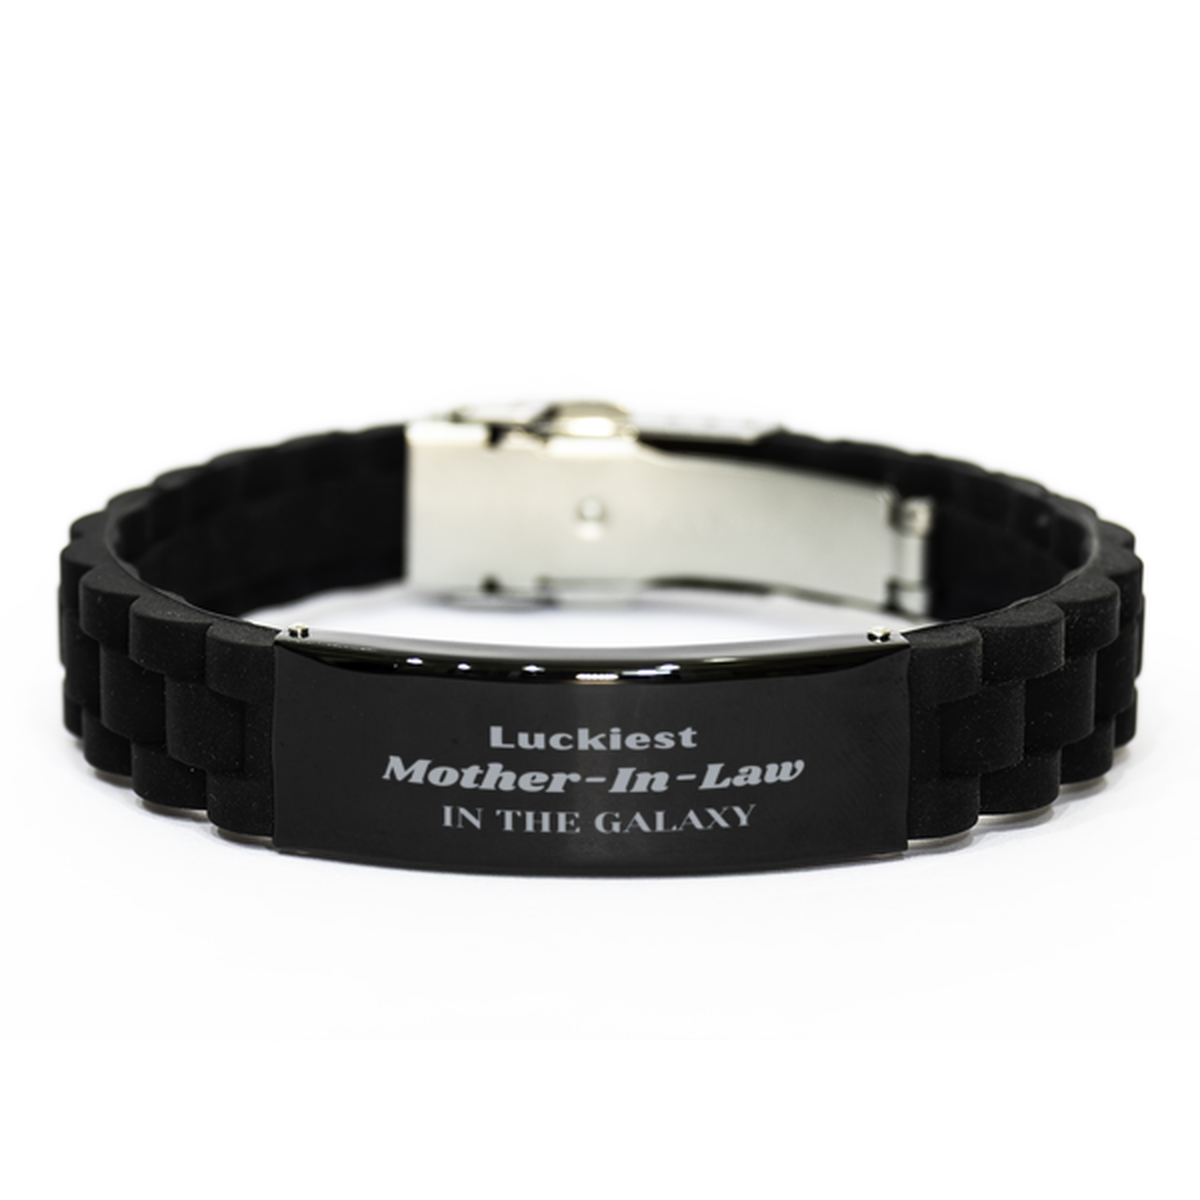 Luckiest Mother-In-Law in the Galaxy, To My Mother-In-Law Engraved Gifts, Christmas Mother-In-Law Black Glidelock Clasp Bracelet Gifts, X-mas Birthday Unique Gifts For Mother-In-Law Men Women